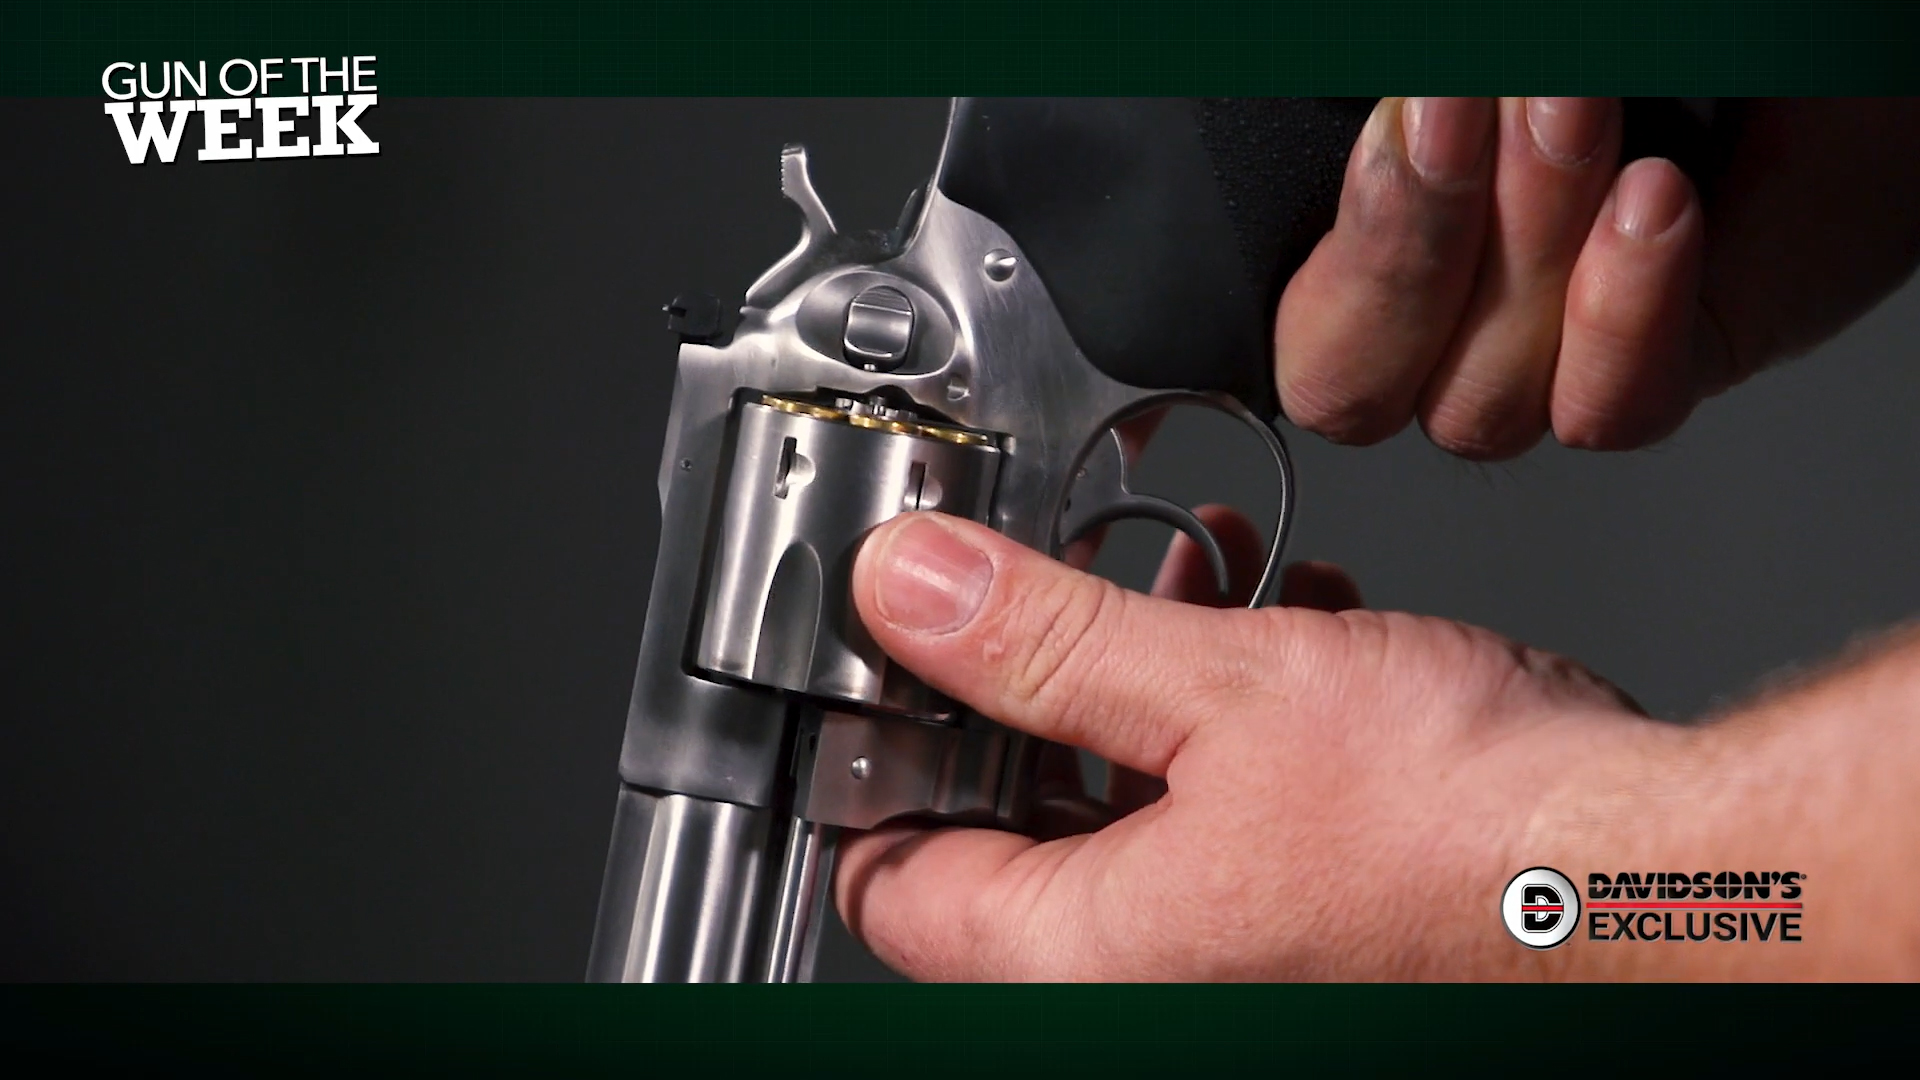 American Rifleman Gun Of The Week Davidson's Exclusive screenshot man hands loading stainless steel silver color revolver Ruger GP100 5"